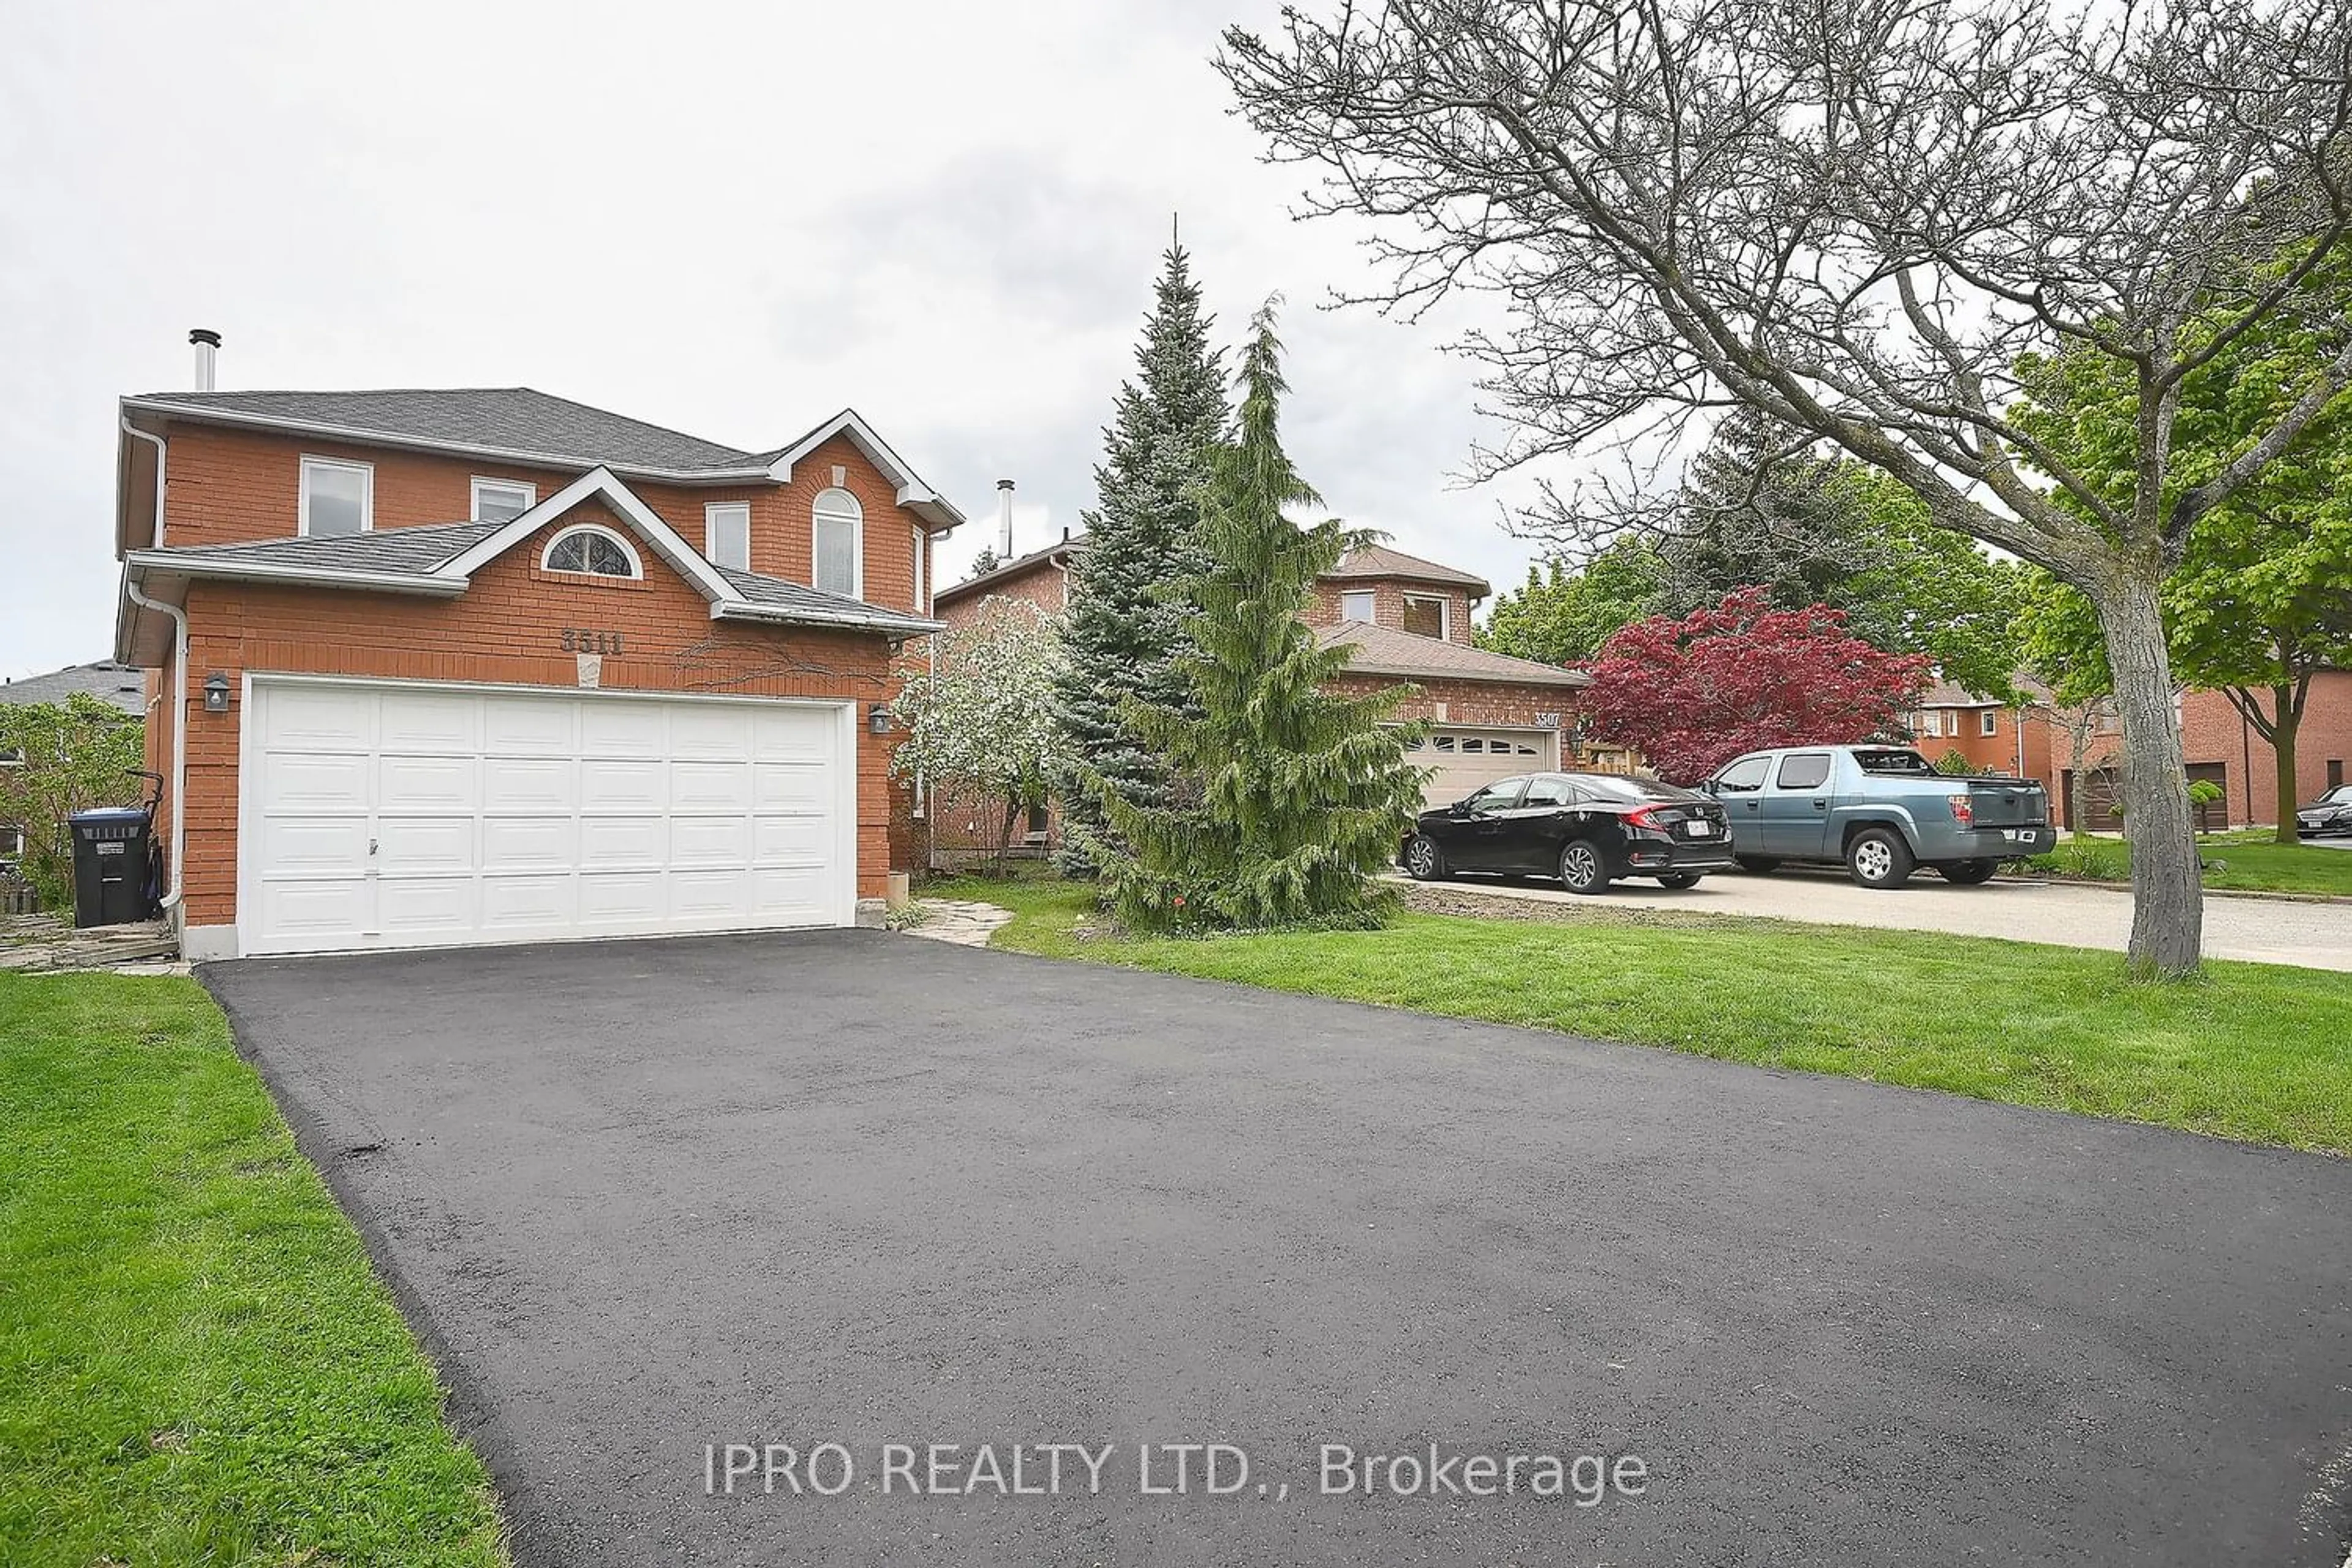 Frontside or backside of a home for 3511 Pintail Circ, Mississauga Ontario L5N 6C7